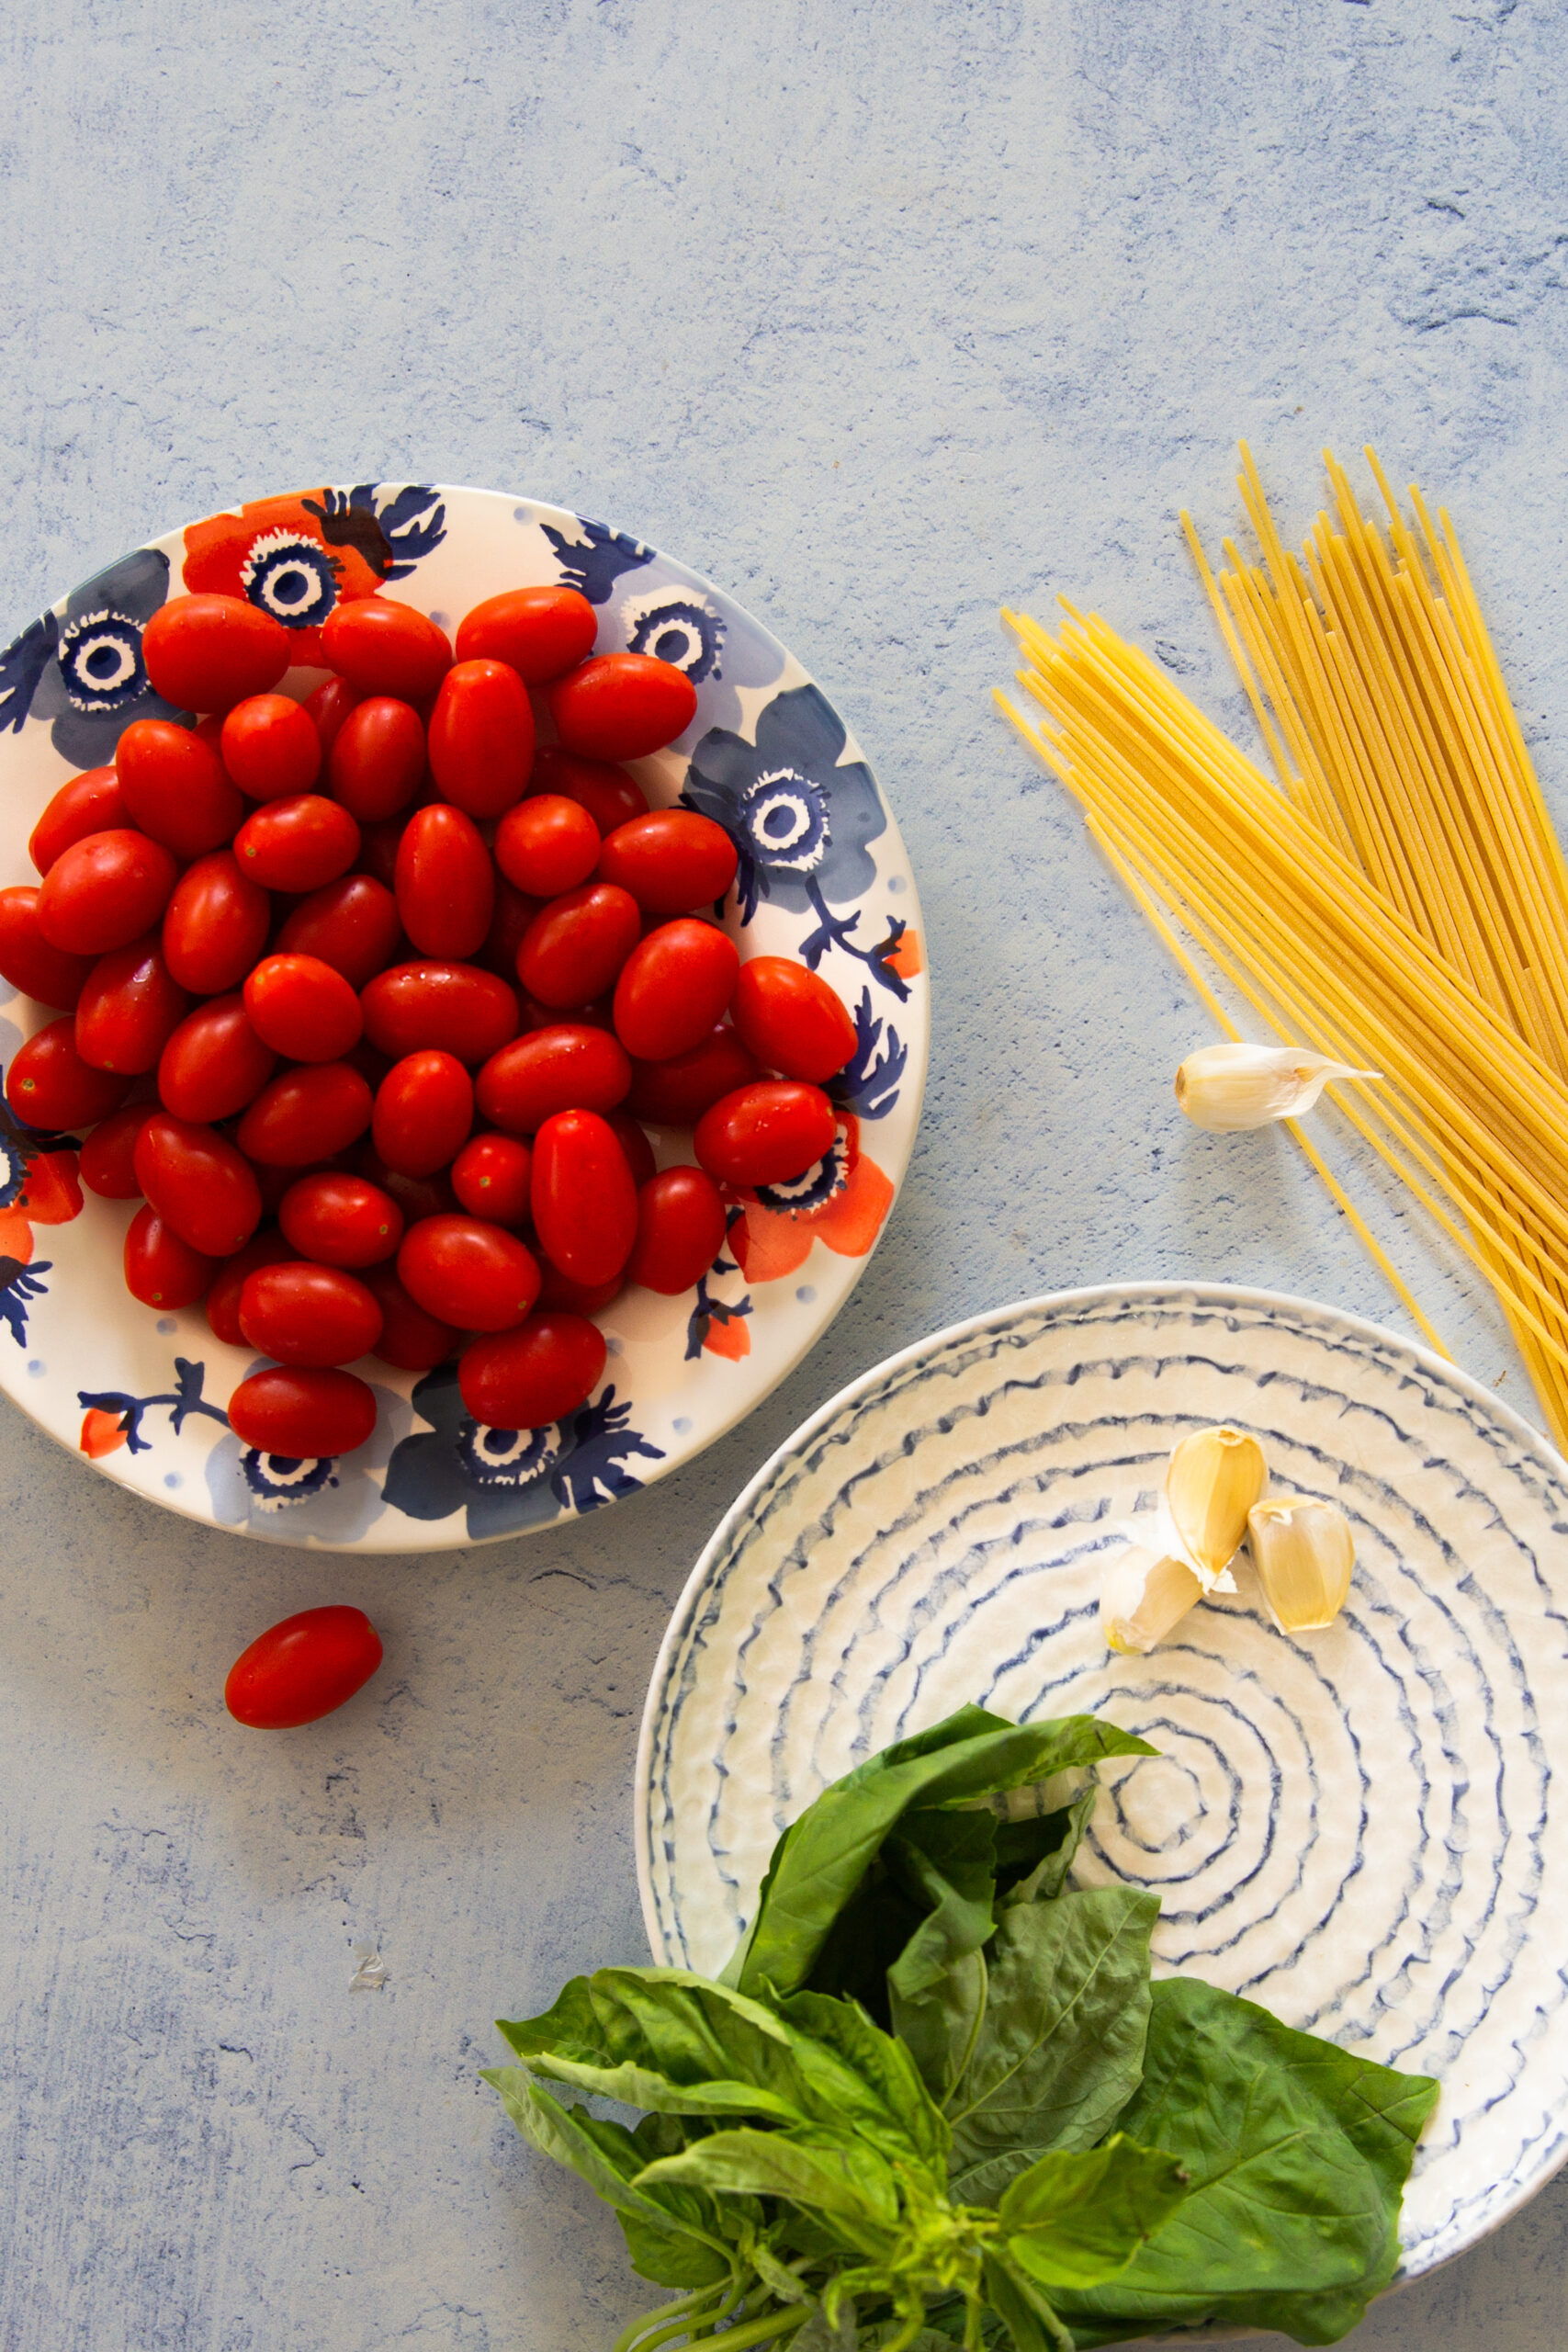 Plate of cherry tomatoes, raw spaghetti, garlic cloves and fresh basil on a light blue surface for pasta with cherry tomatoes and basil.